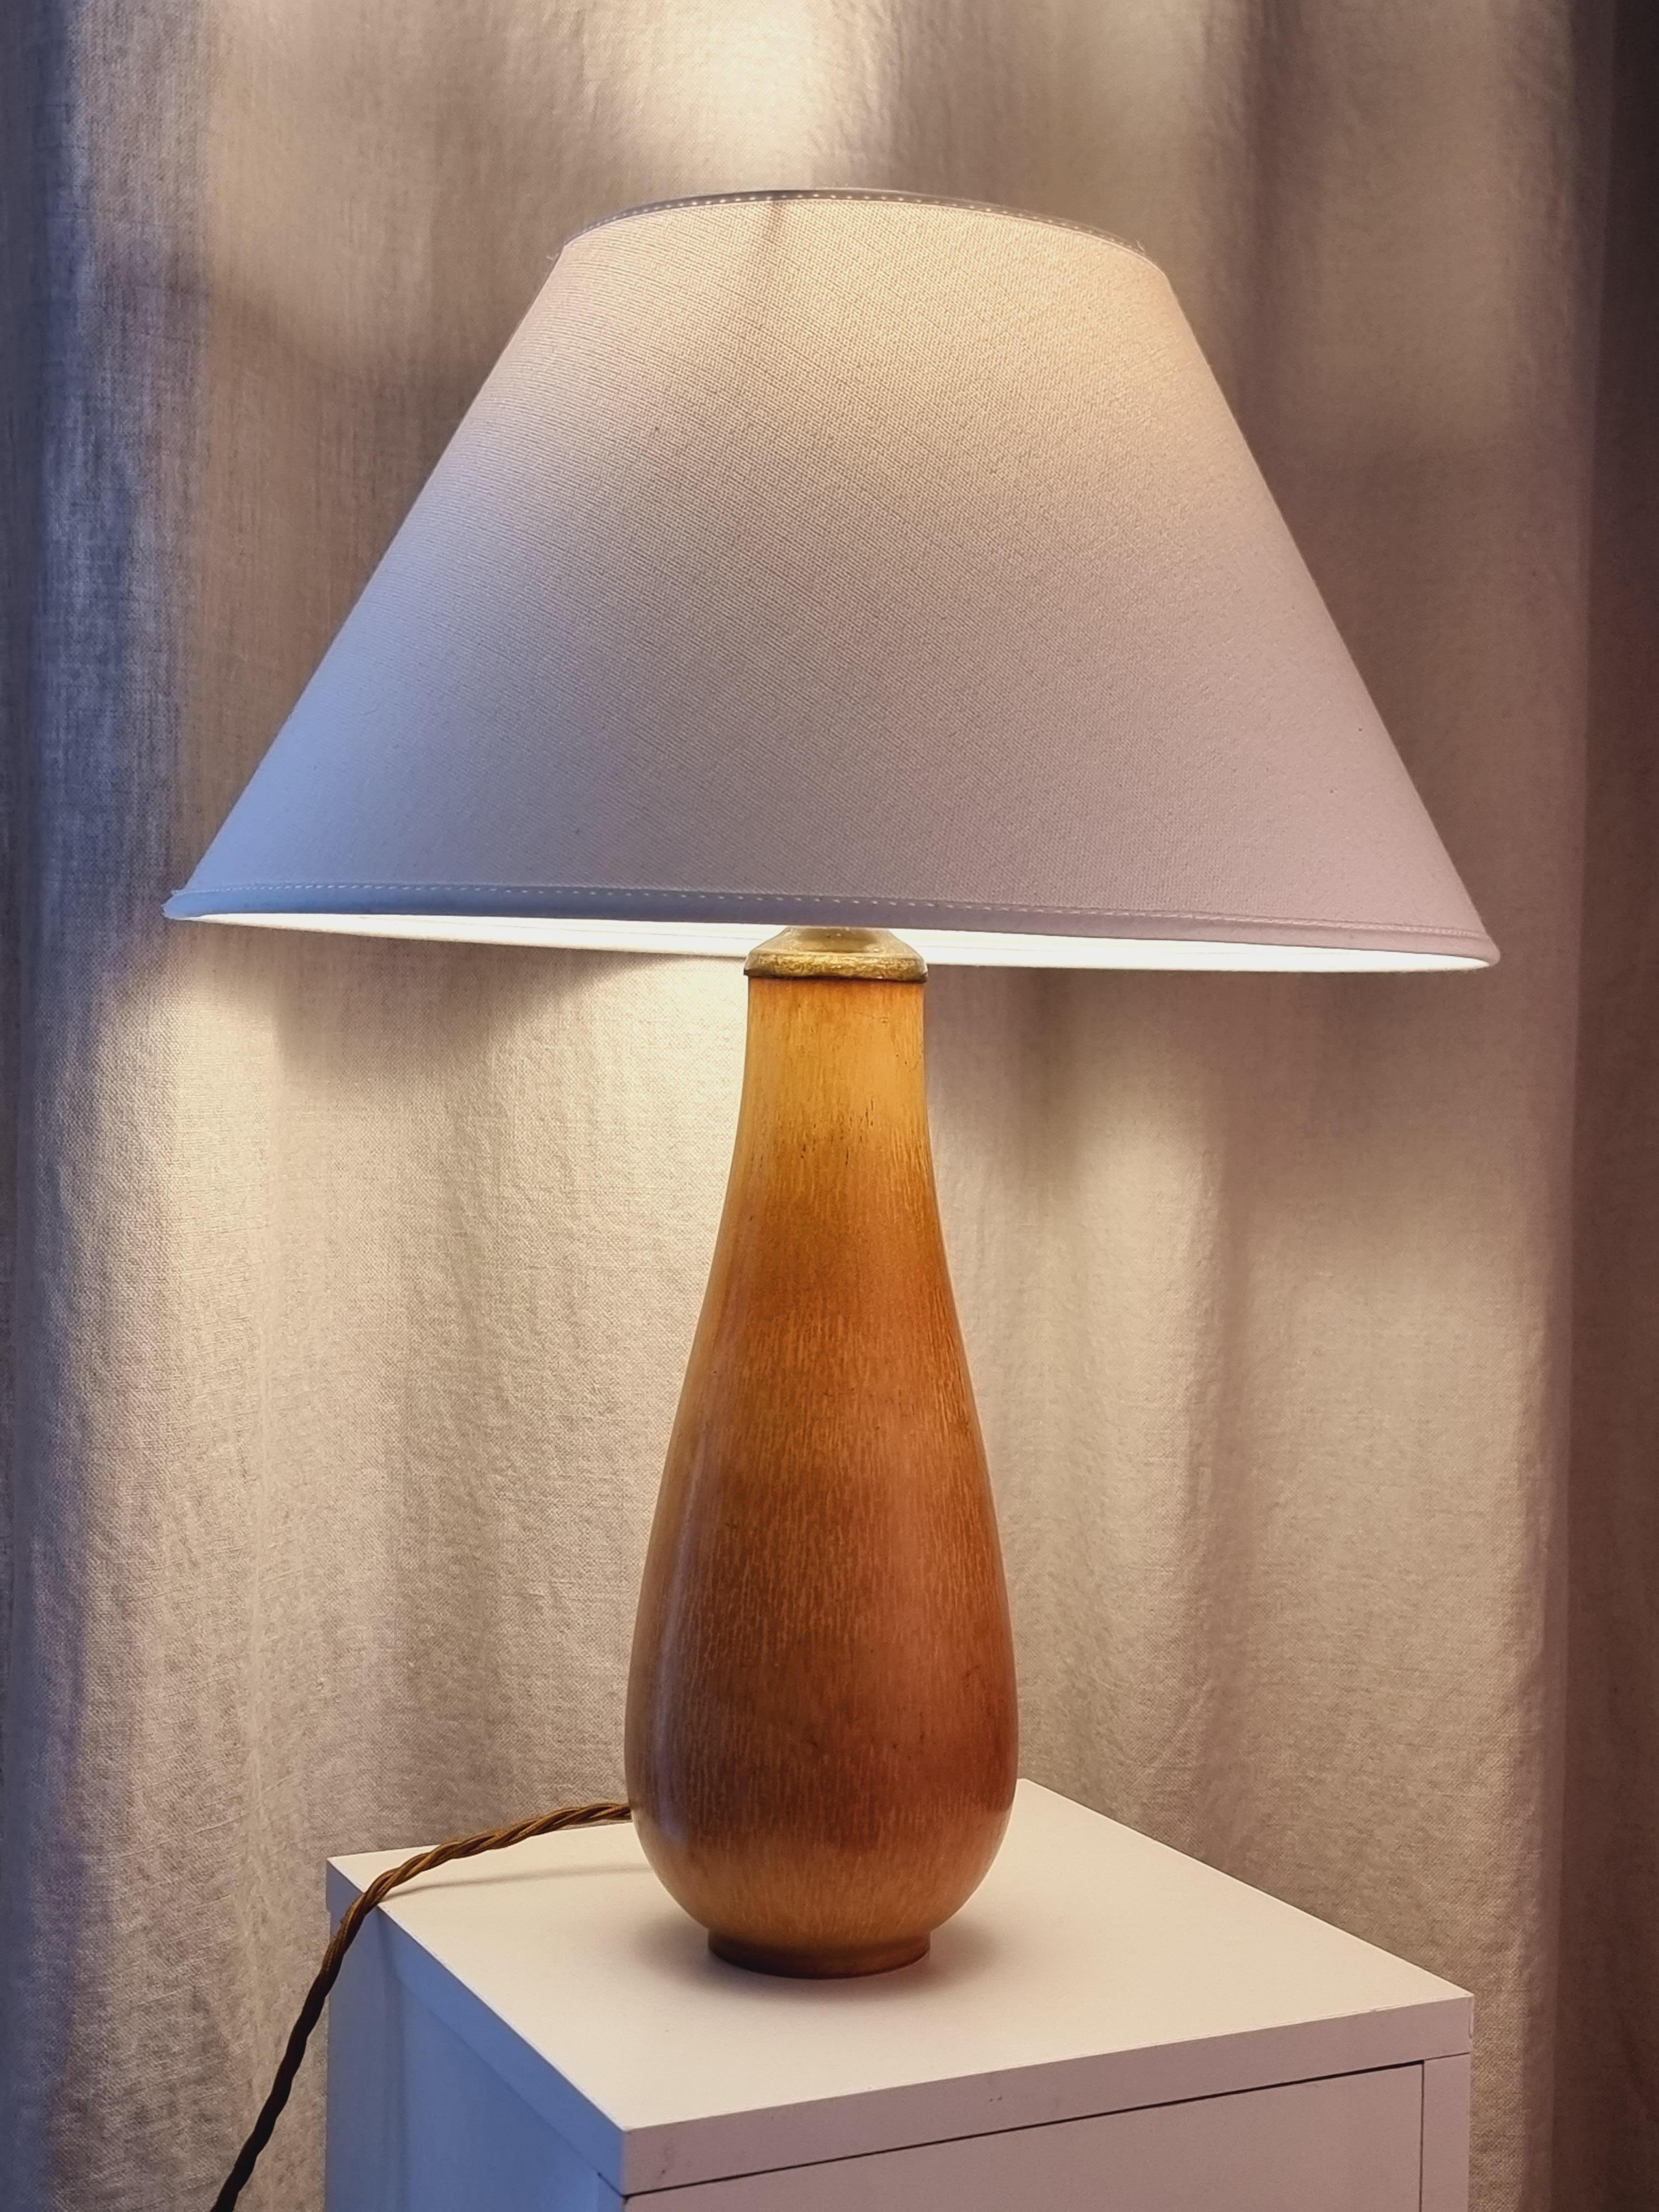 A beautiful example of Gunnar Nylunds artistry, a ceramic table lamp with brown hare fur glaze. 

Marked with Rörstrand and G. Nylund in bottom. In good condition, new wiring follow Swedish standard.

About the artist:

Gunnar Nylund was born in